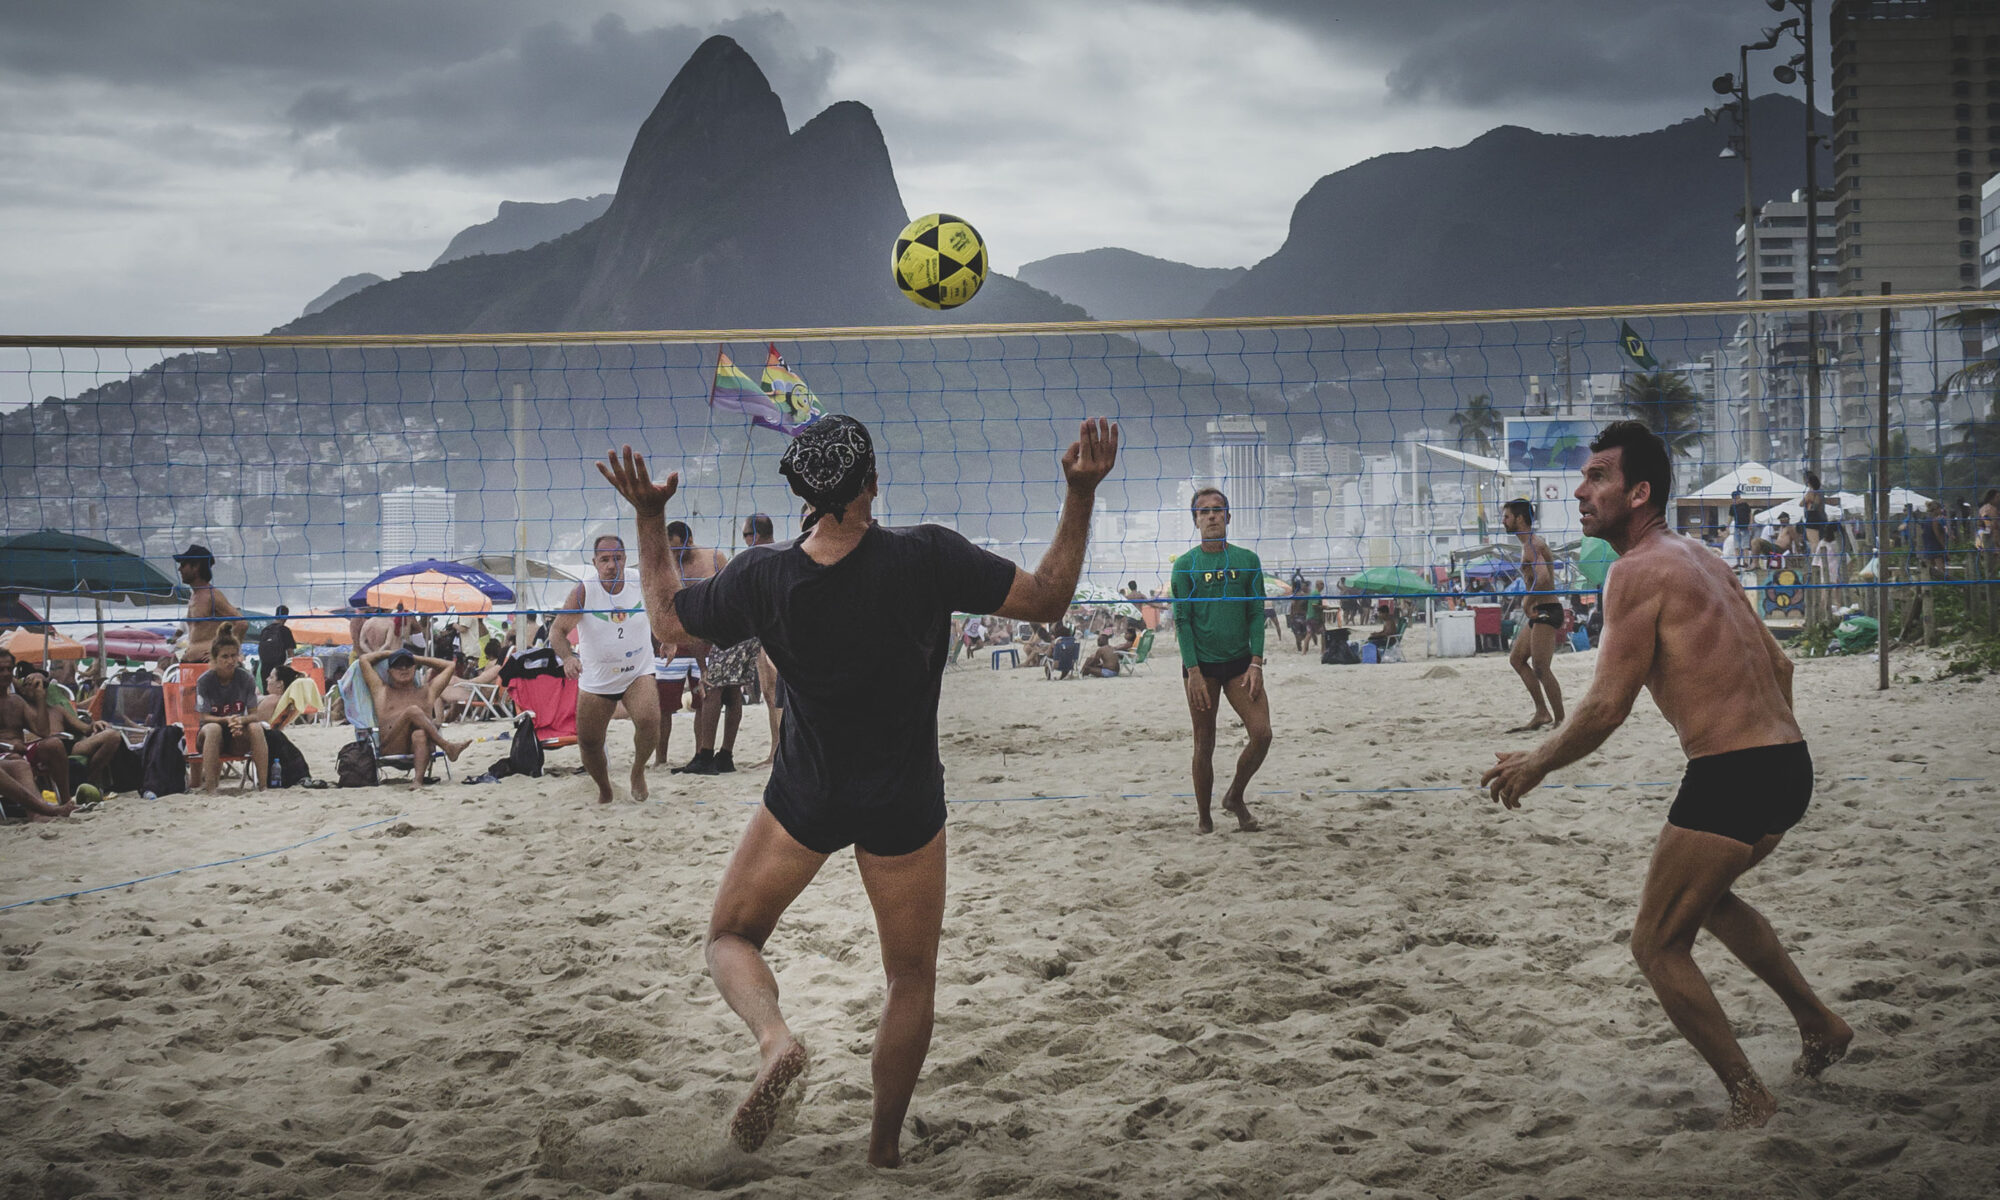 Footvolley: One of the national sports of Brazil